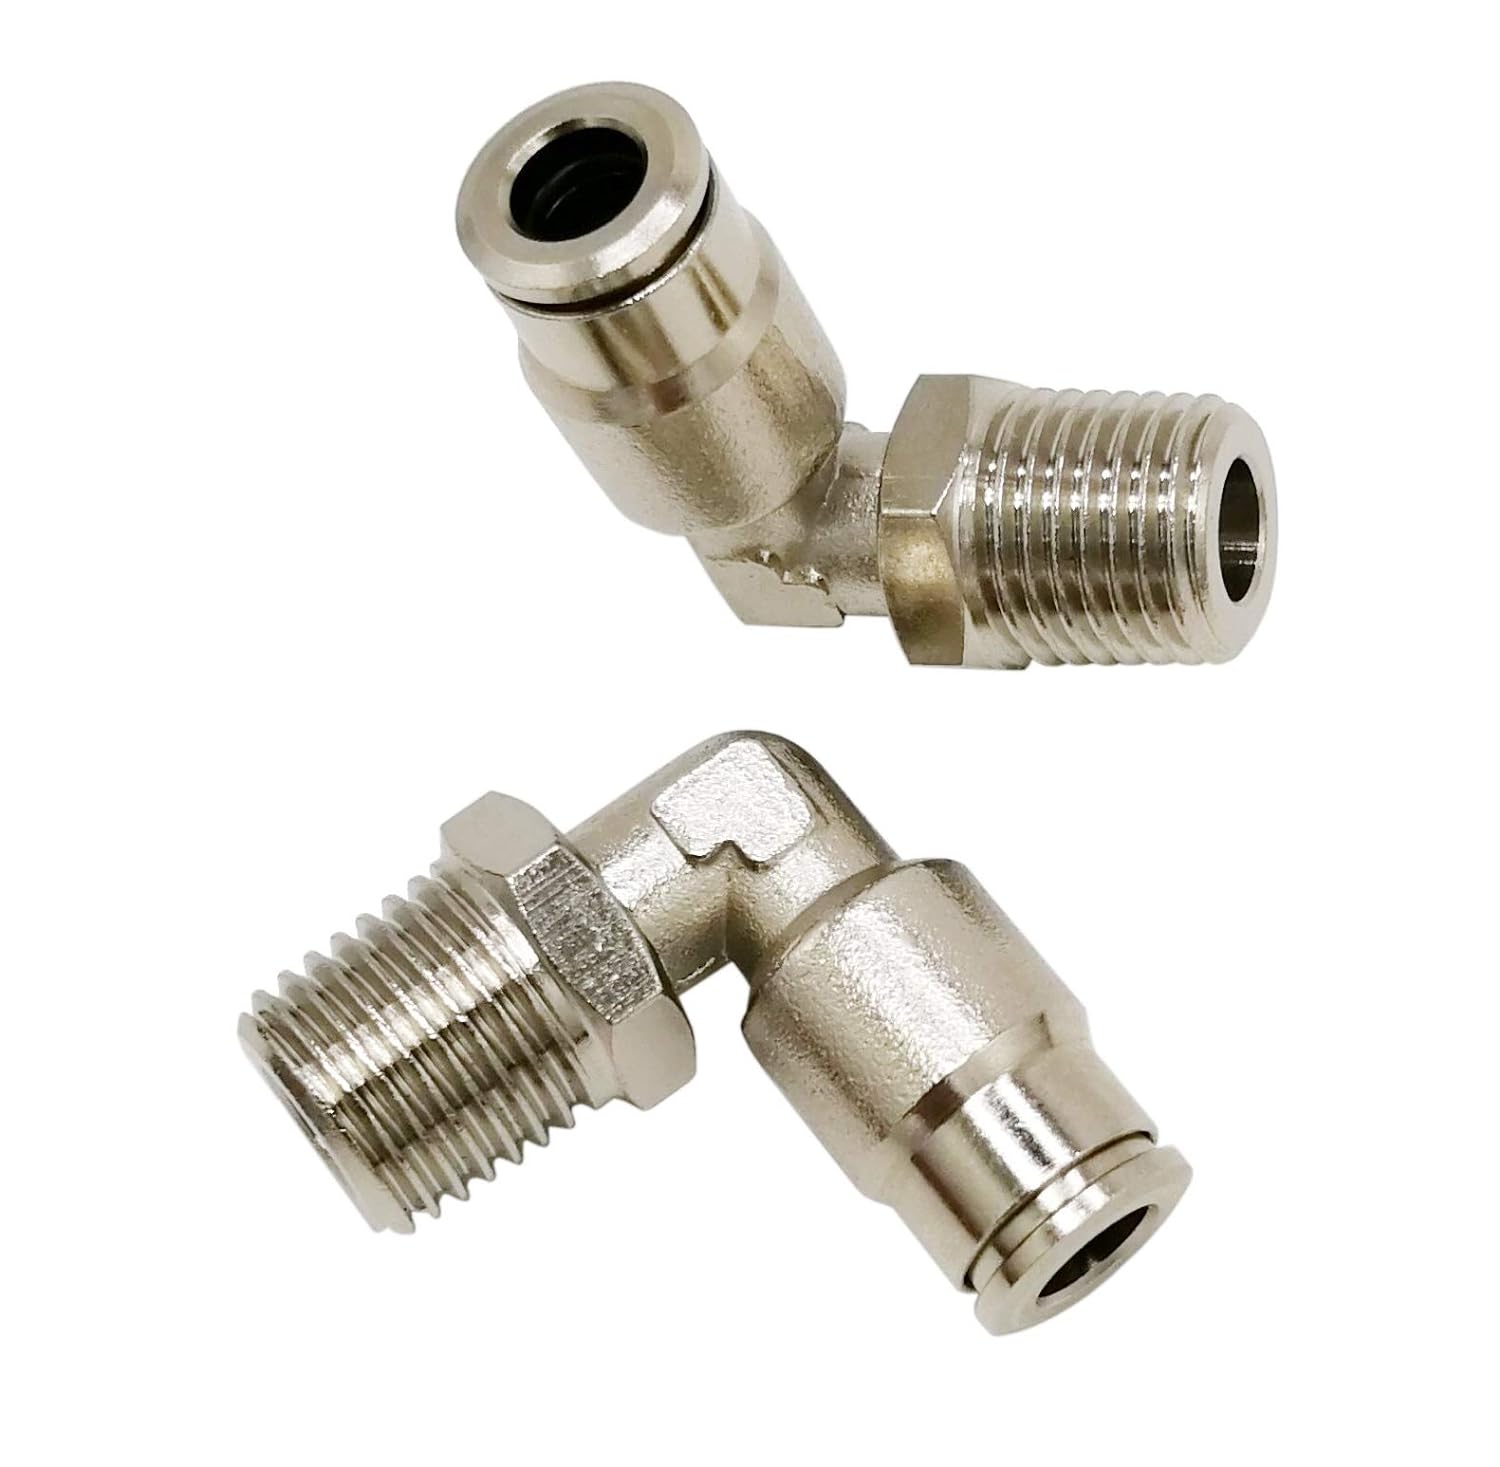 10pcs Pneumatic Tee Union Connectors Tube OD 1/4 Inch Push In Air Fitting Set 